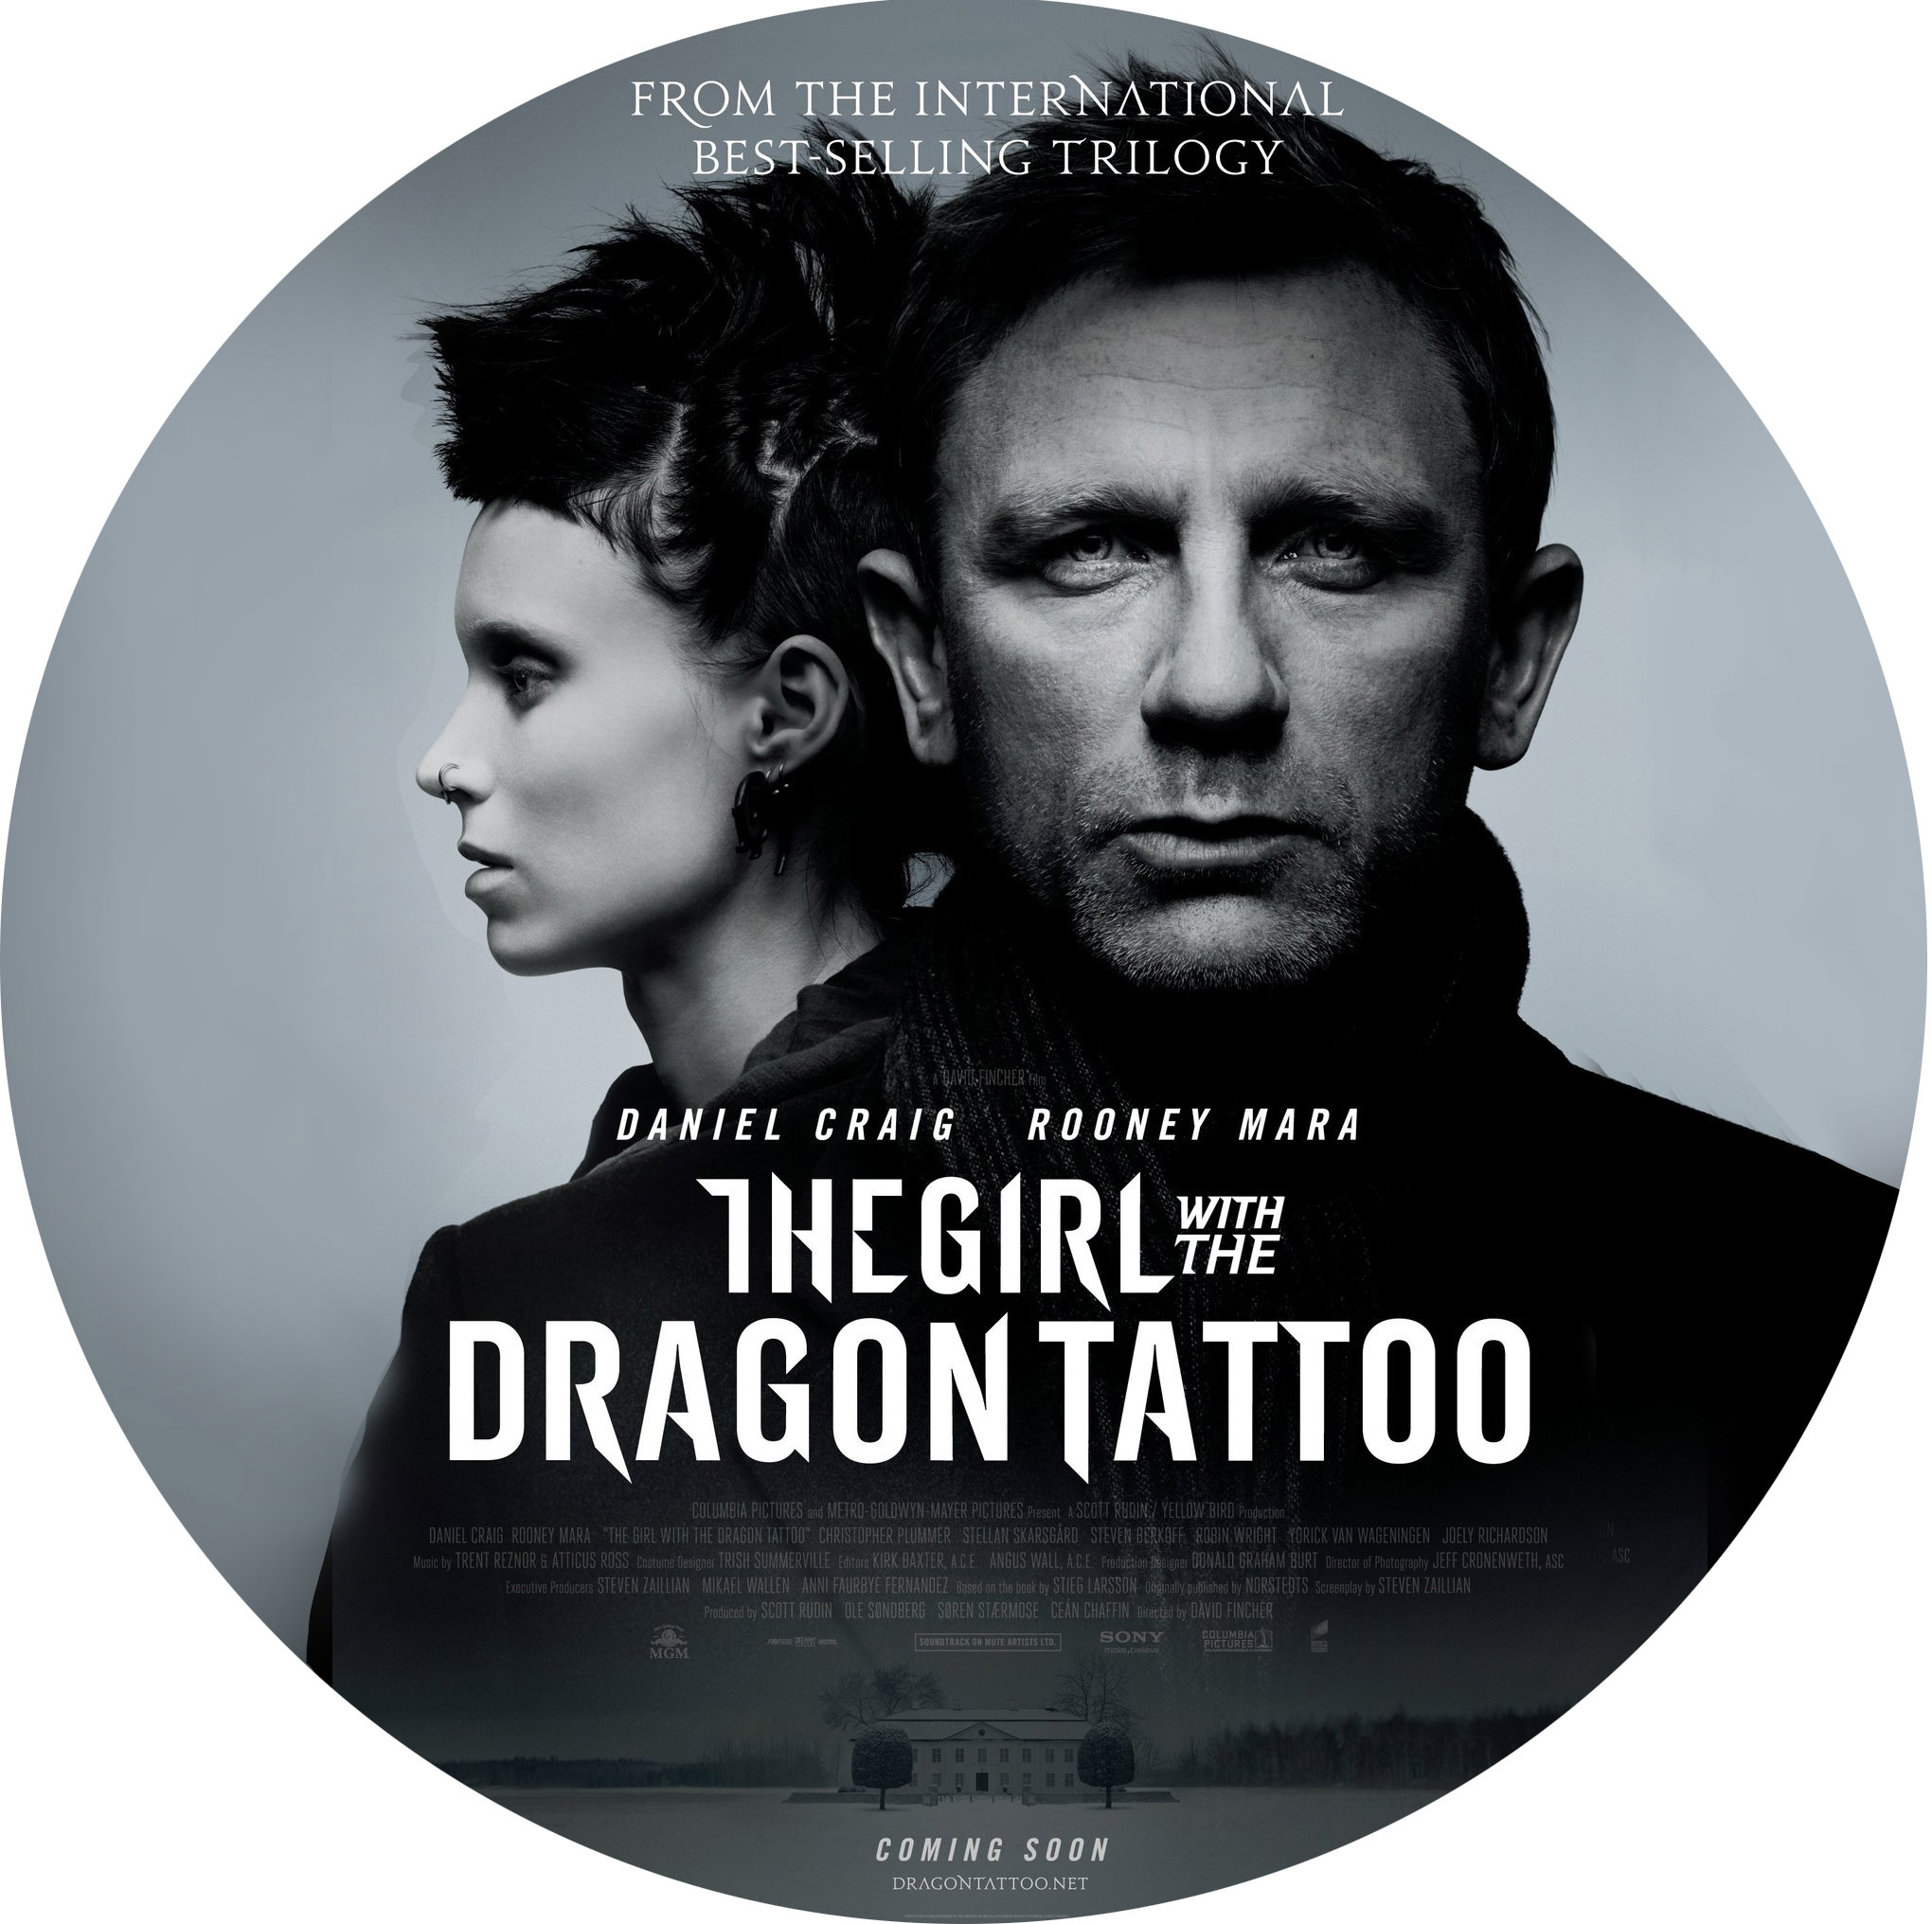 WINNER OF EXCELLENCE IN PRODUCTION DESIGN FOR CONTEMPORARY FILM: THE GIRL WITH THE DRAGON TATTOO.